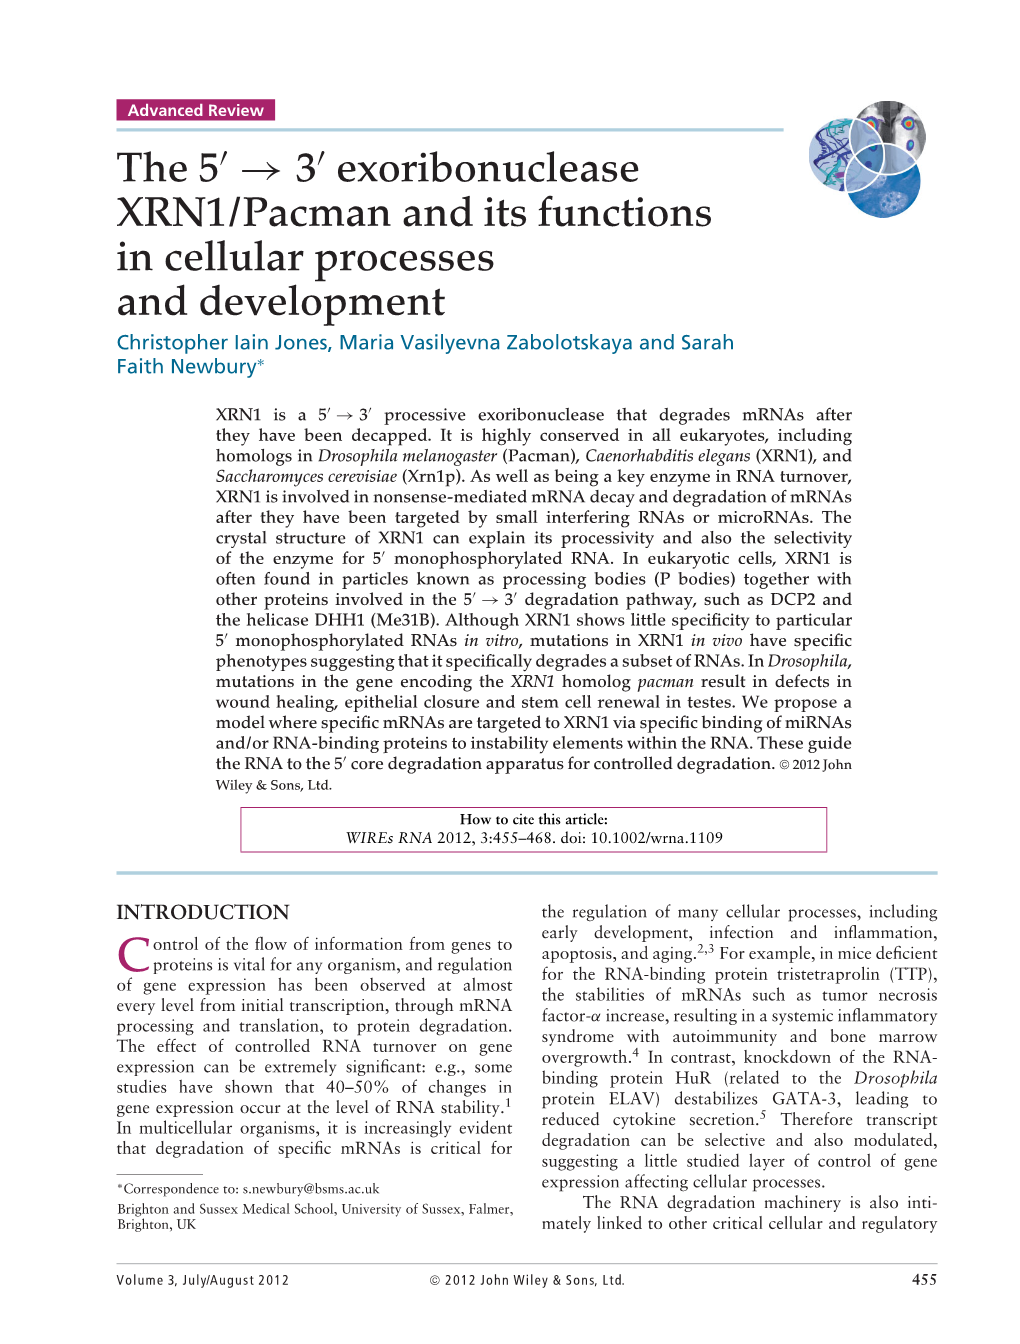 The 5 3 Exoribonuclease XRN1/Pacman and Its Functions In